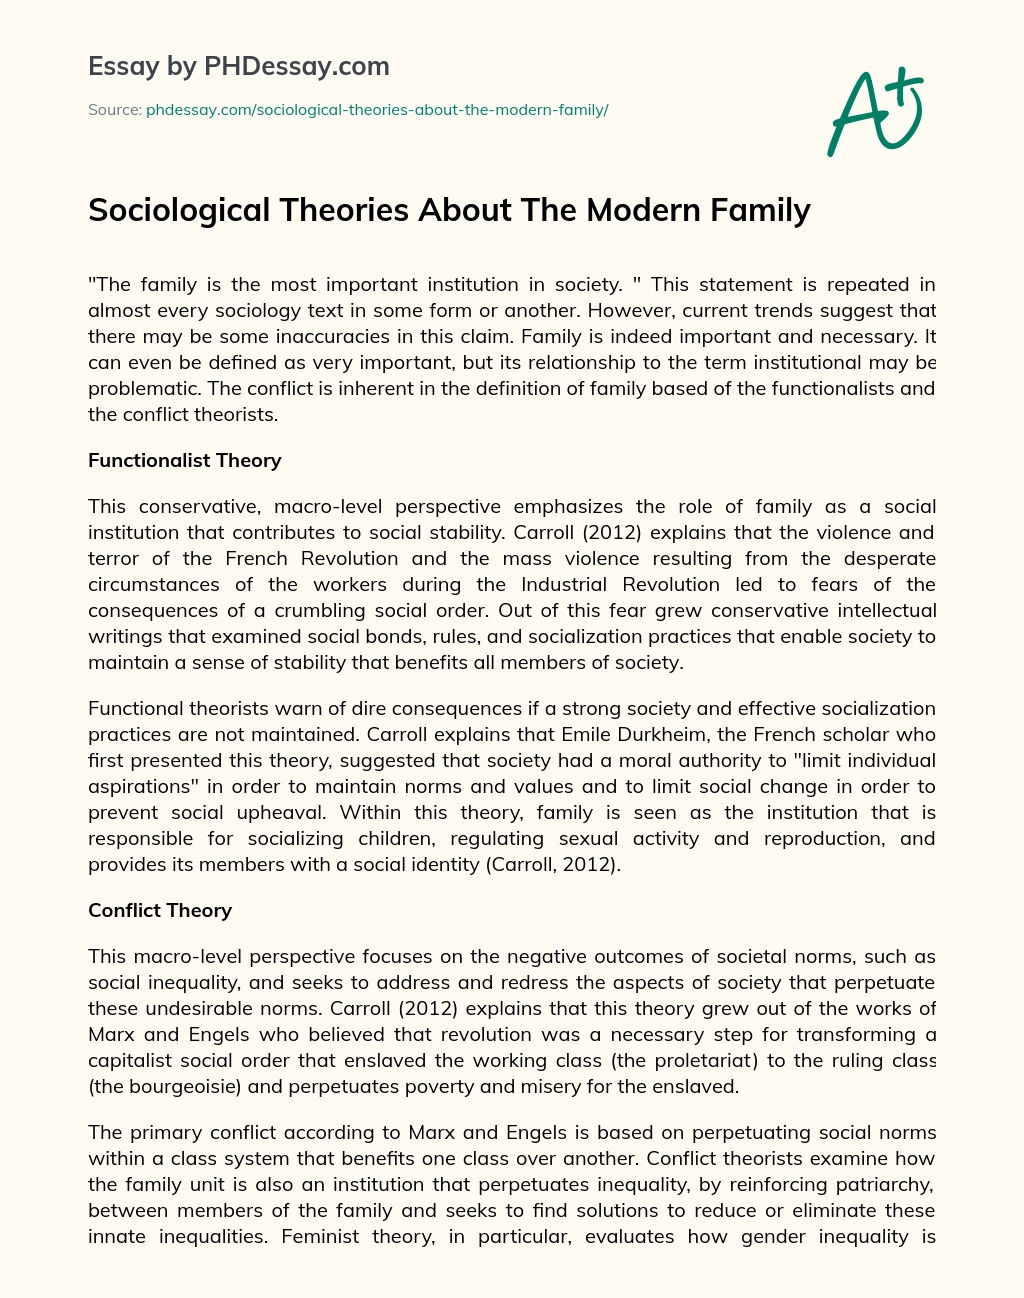 Sociological Theories About The Modern Family essay